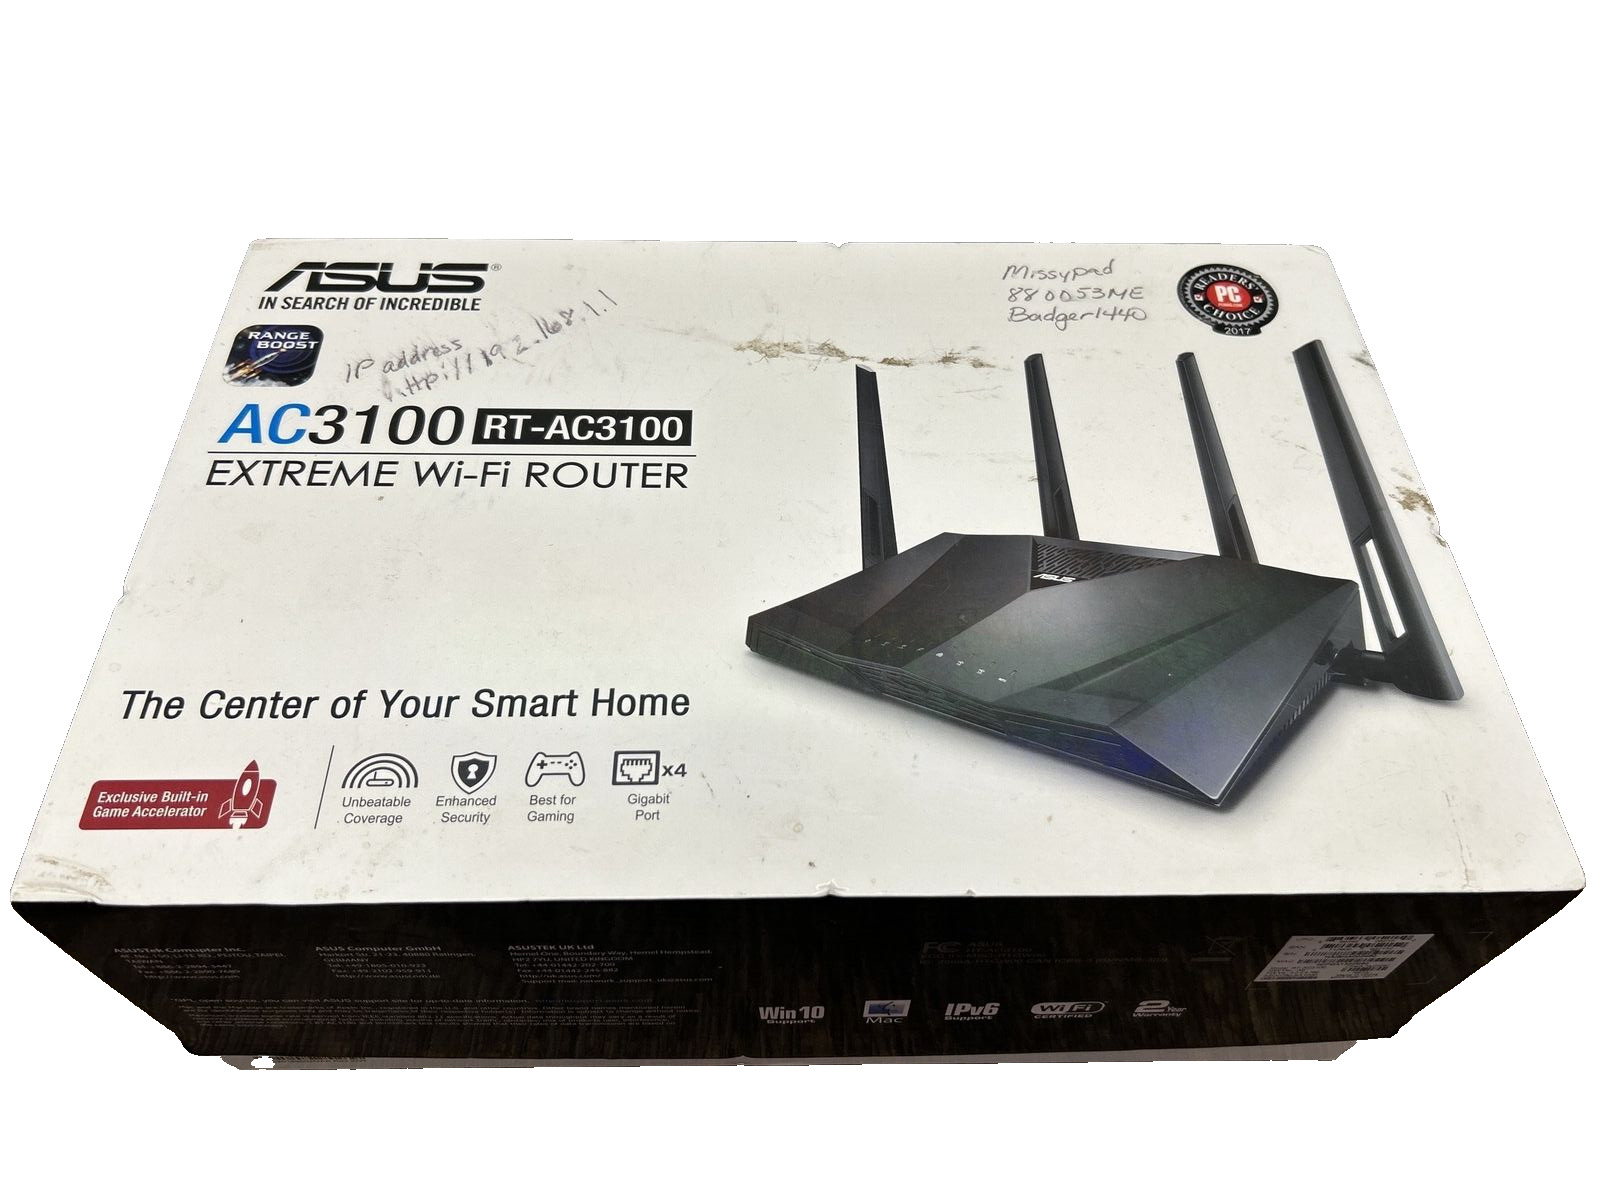 ASUS AC3100 RT-AC3100 Dual-Band Gigabit Wireless Router - 4-Port, Extreme Wi-Fi